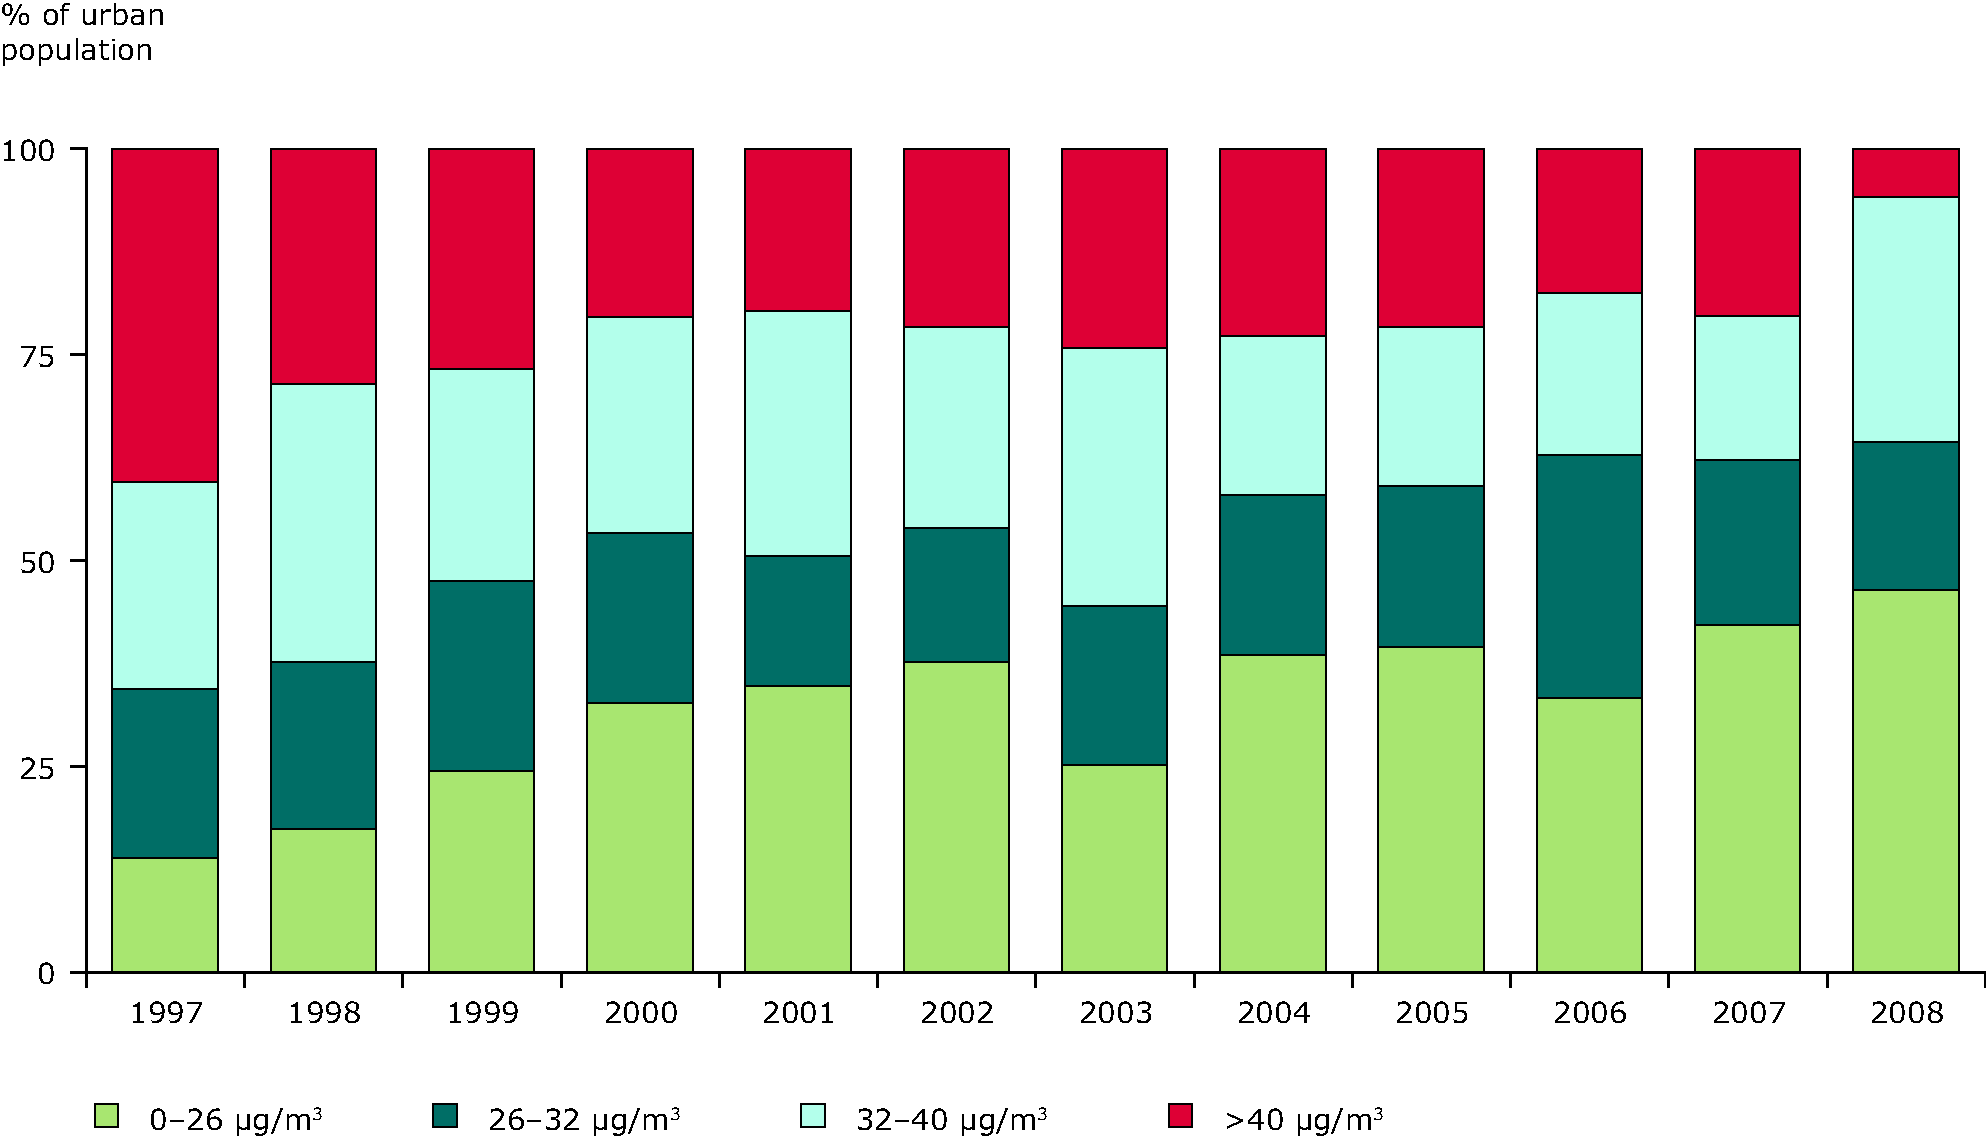 Percentage of population exposed to NO2 annual concentrations in urban areas, EEA member countries, 1997-2008